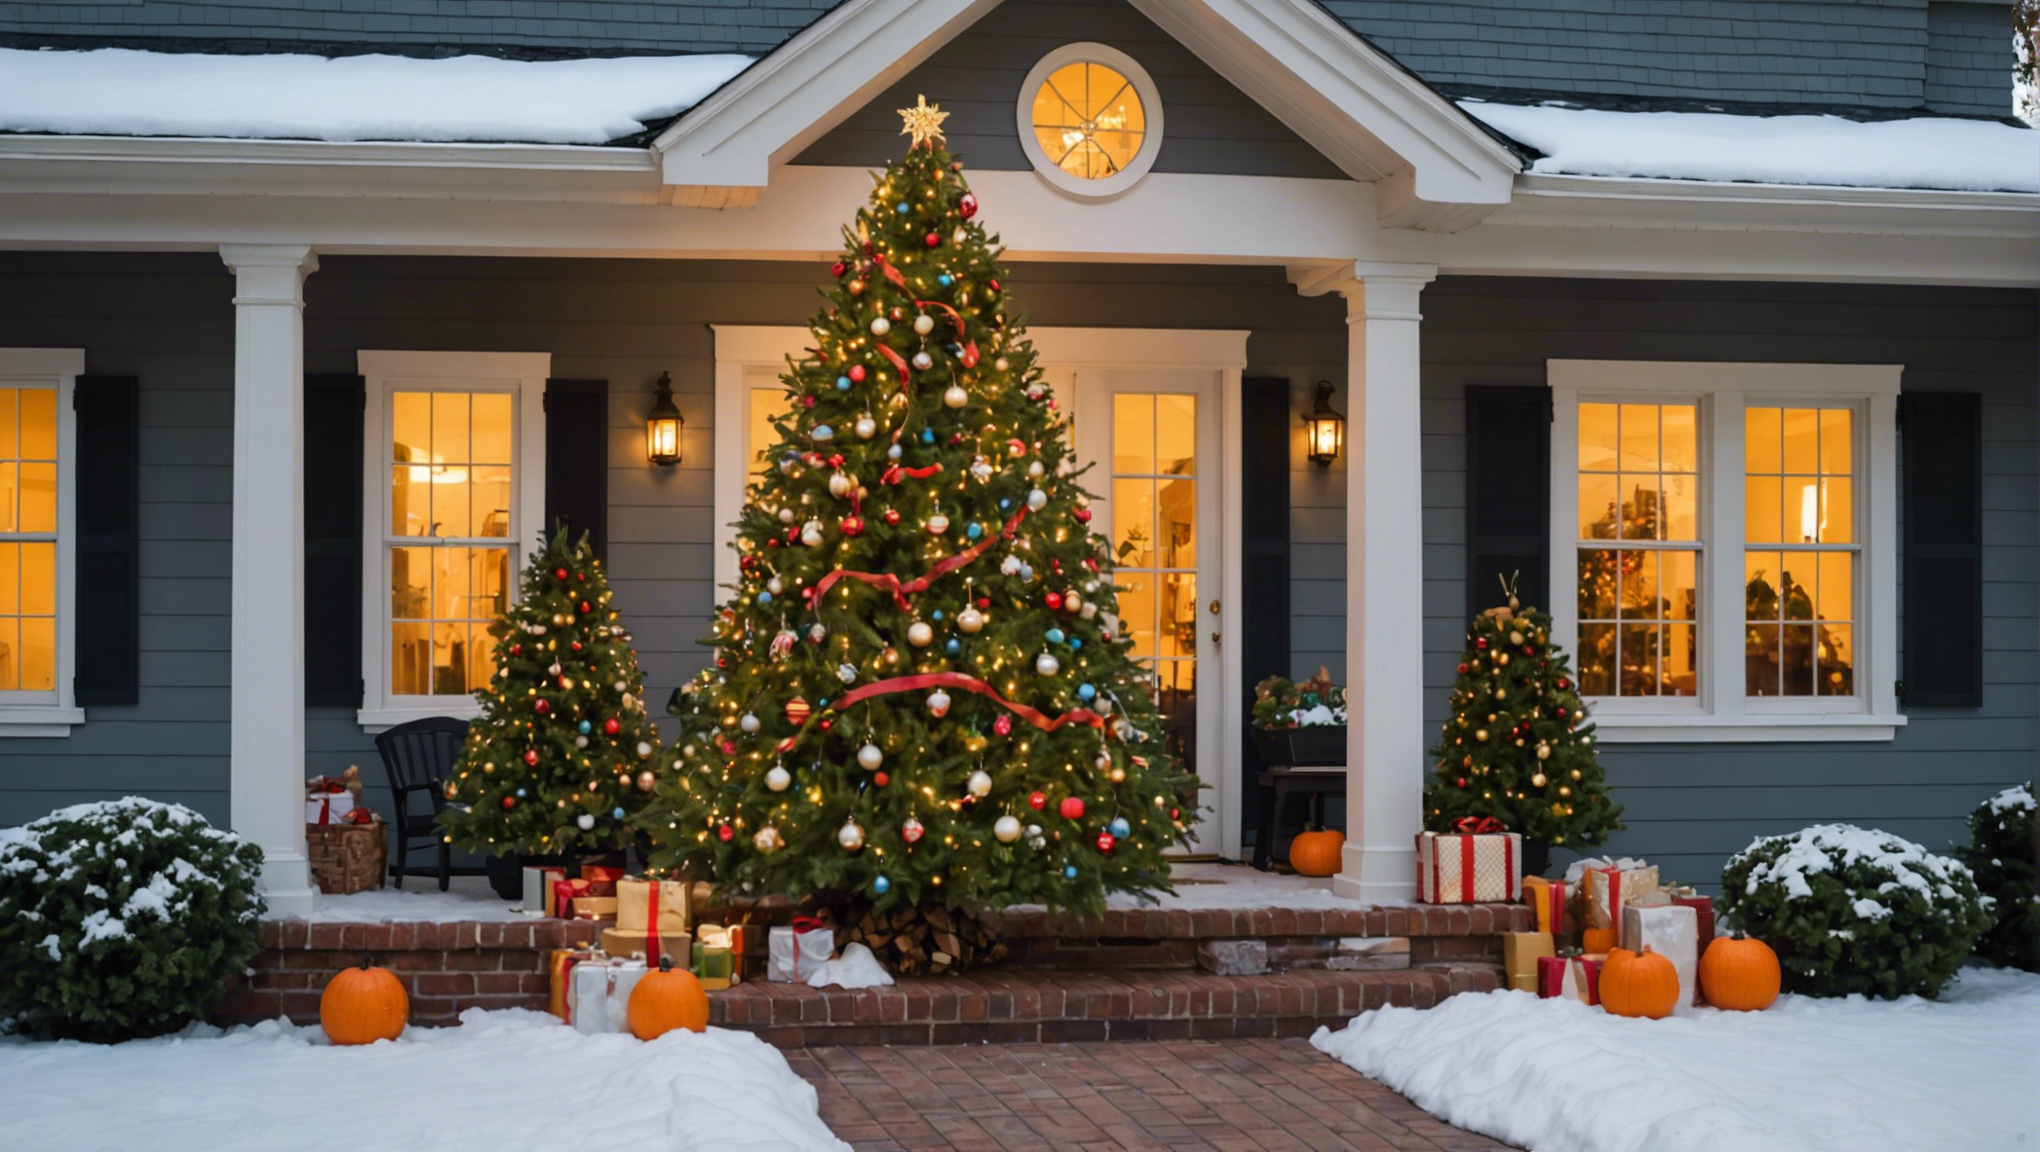 discover effective tips and methods to pest-proof your home for the holidays and enjoy a stress-free festive season with your loved ones.